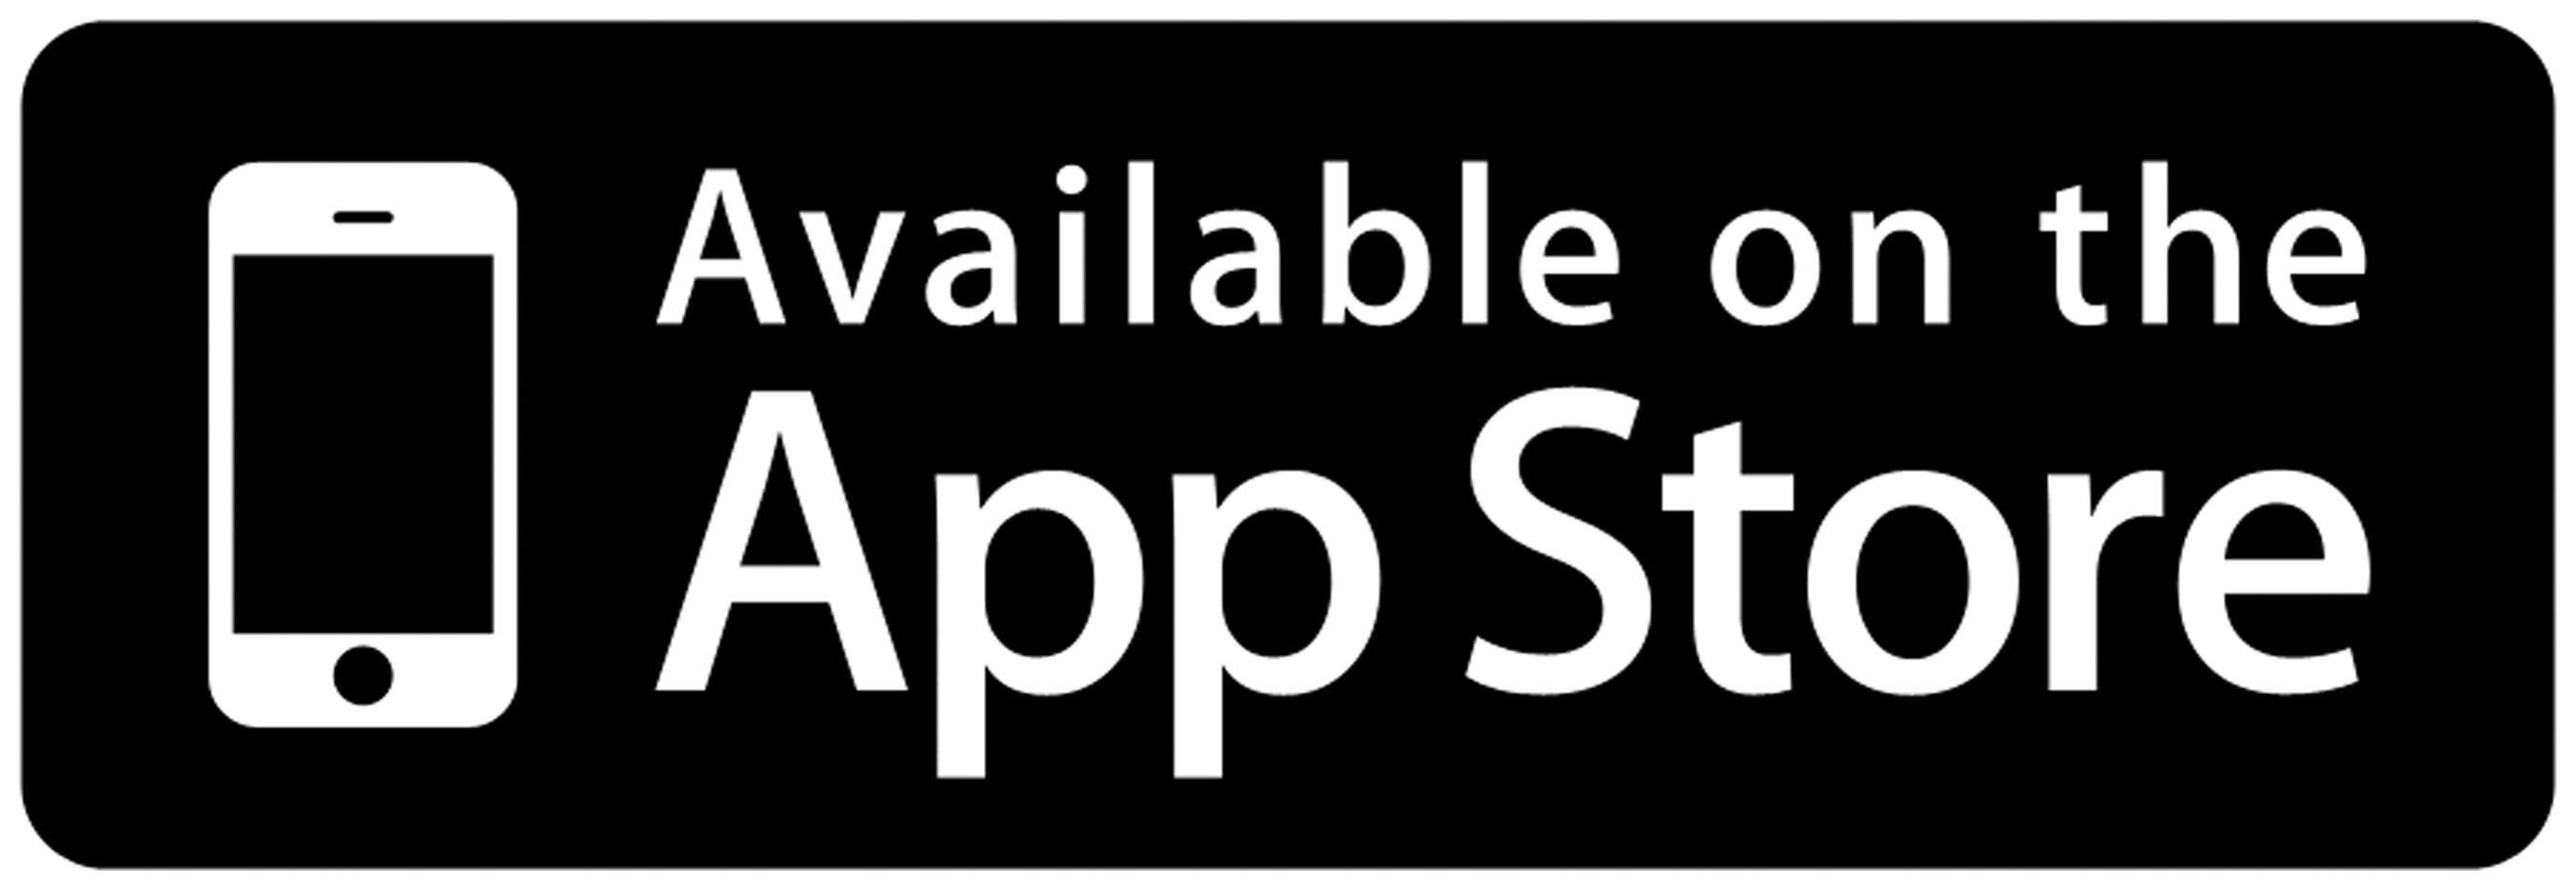 Google App Store Logo - AnkiApp - The best flashcard app to learn languages and more.